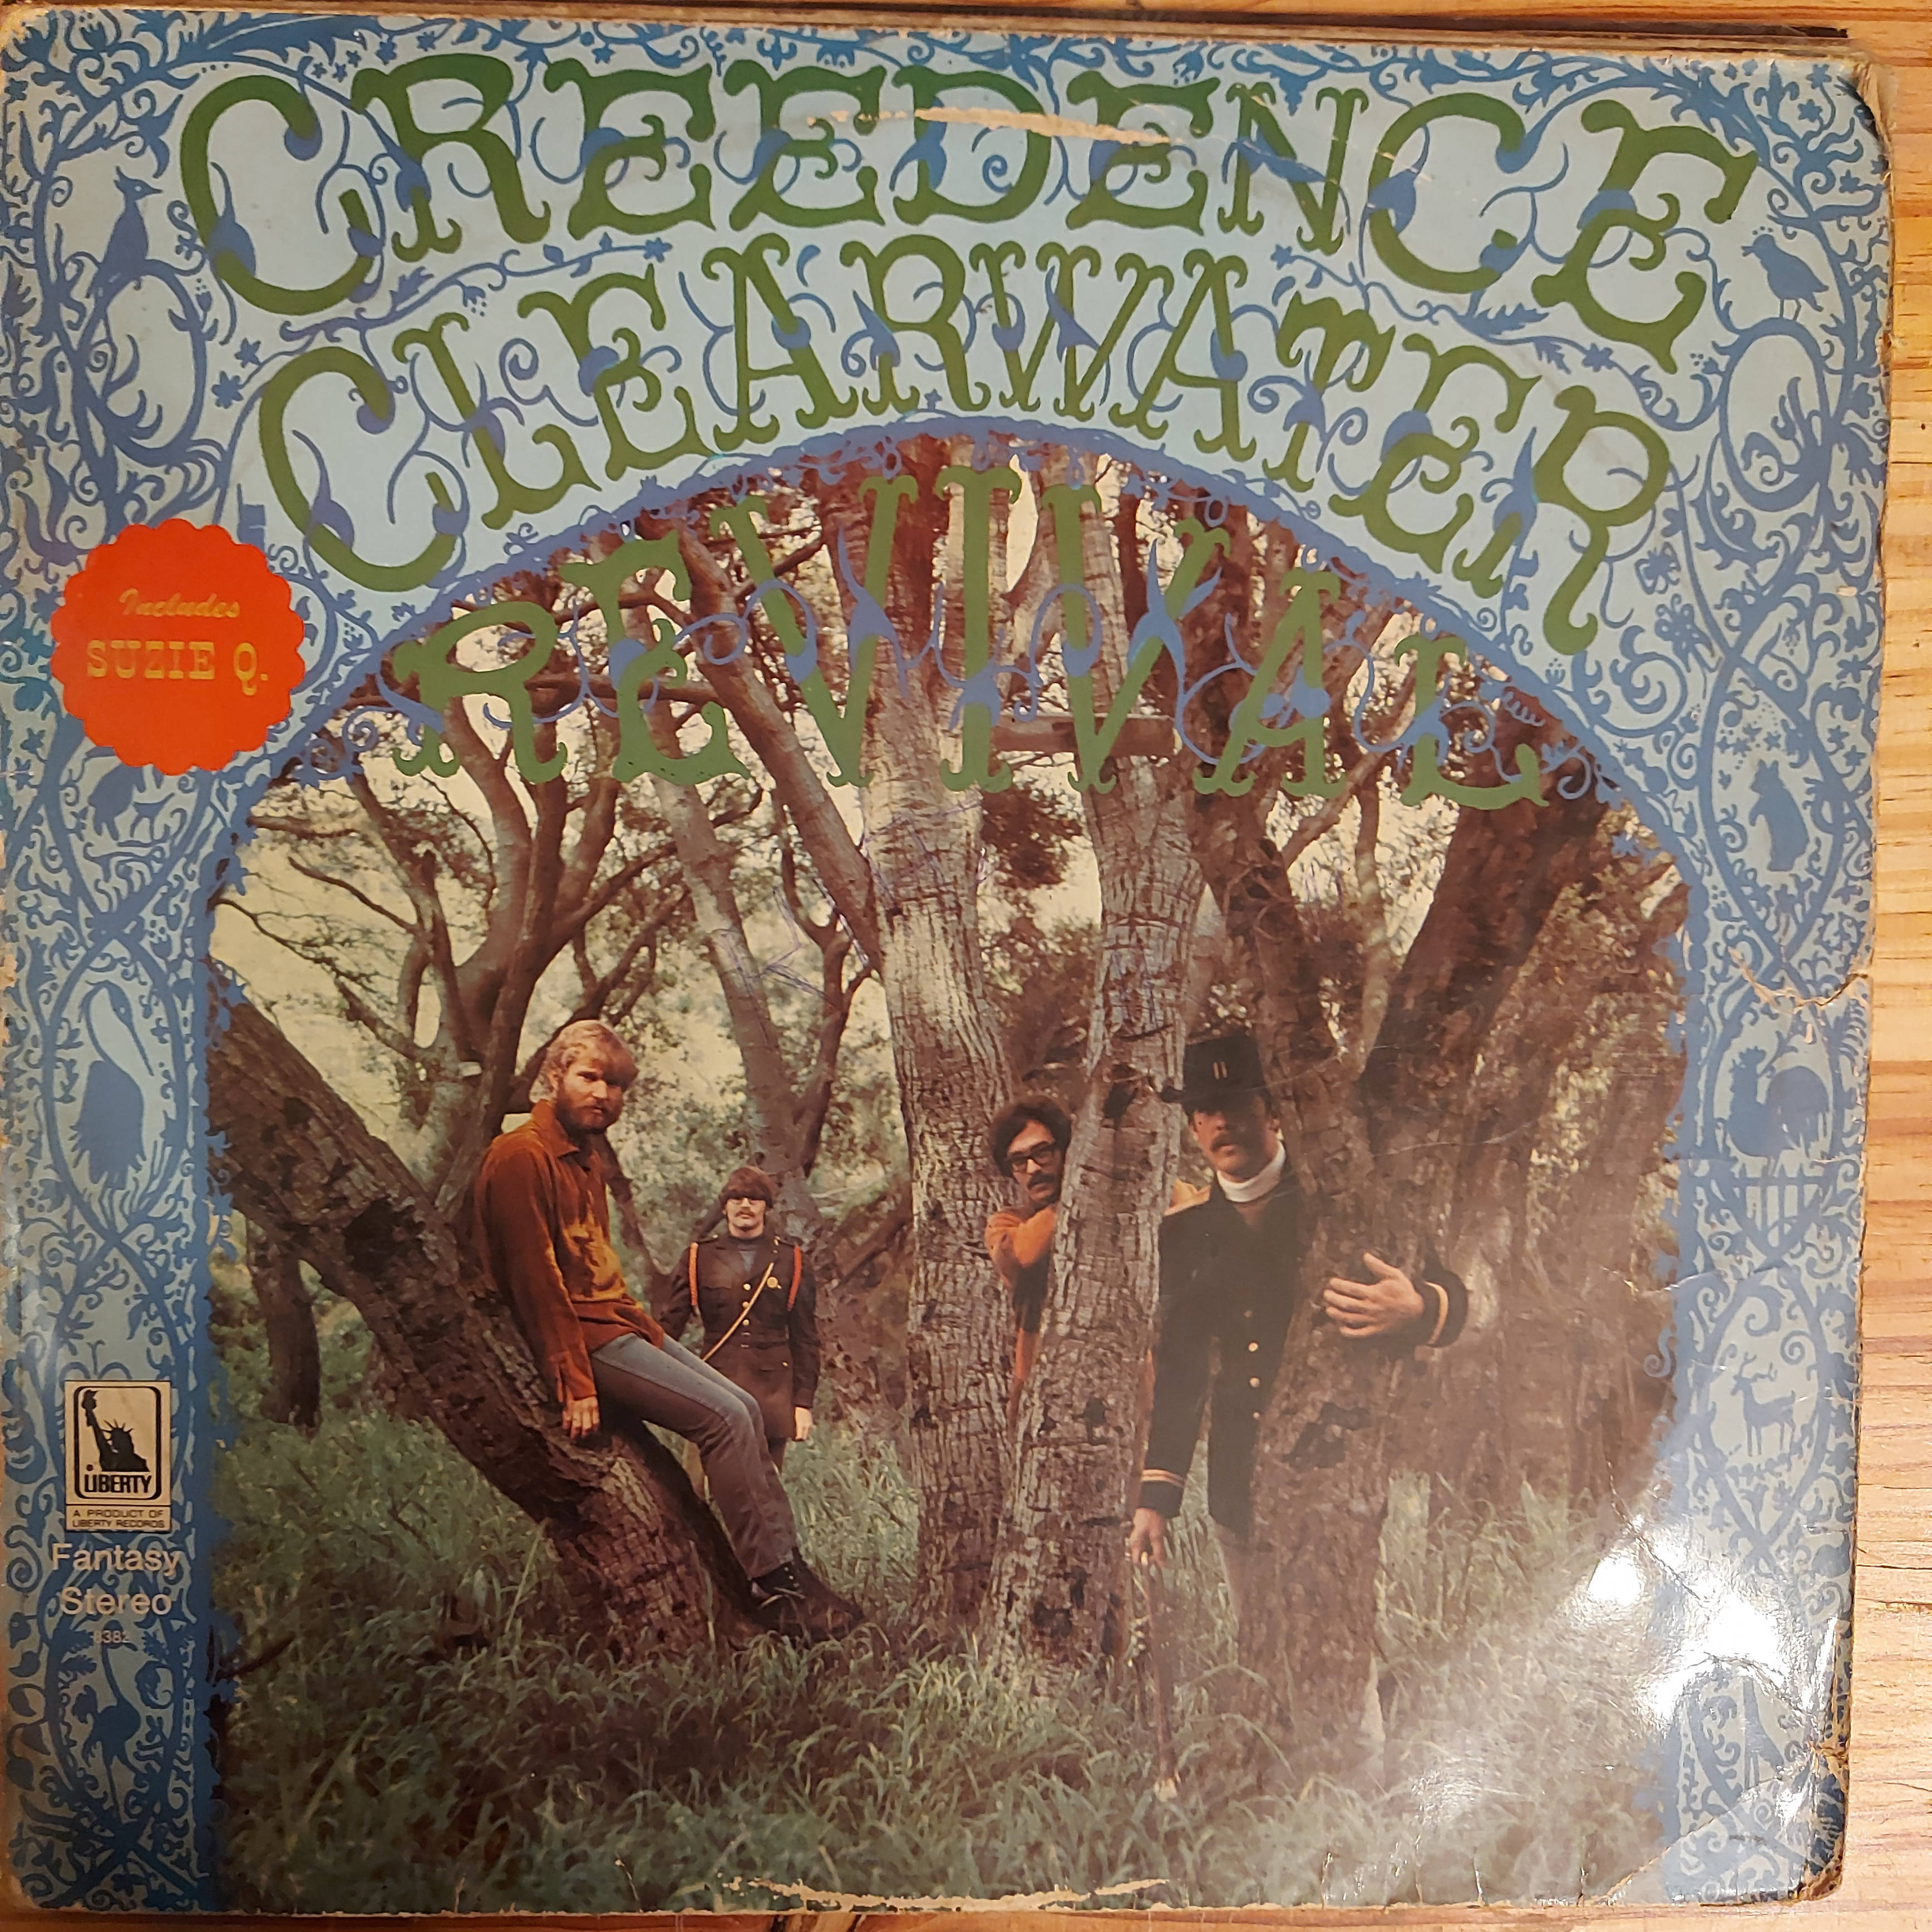 Creedence Clearwater Revival – Creedence Clearwater Revival (Used Vinyl - G)